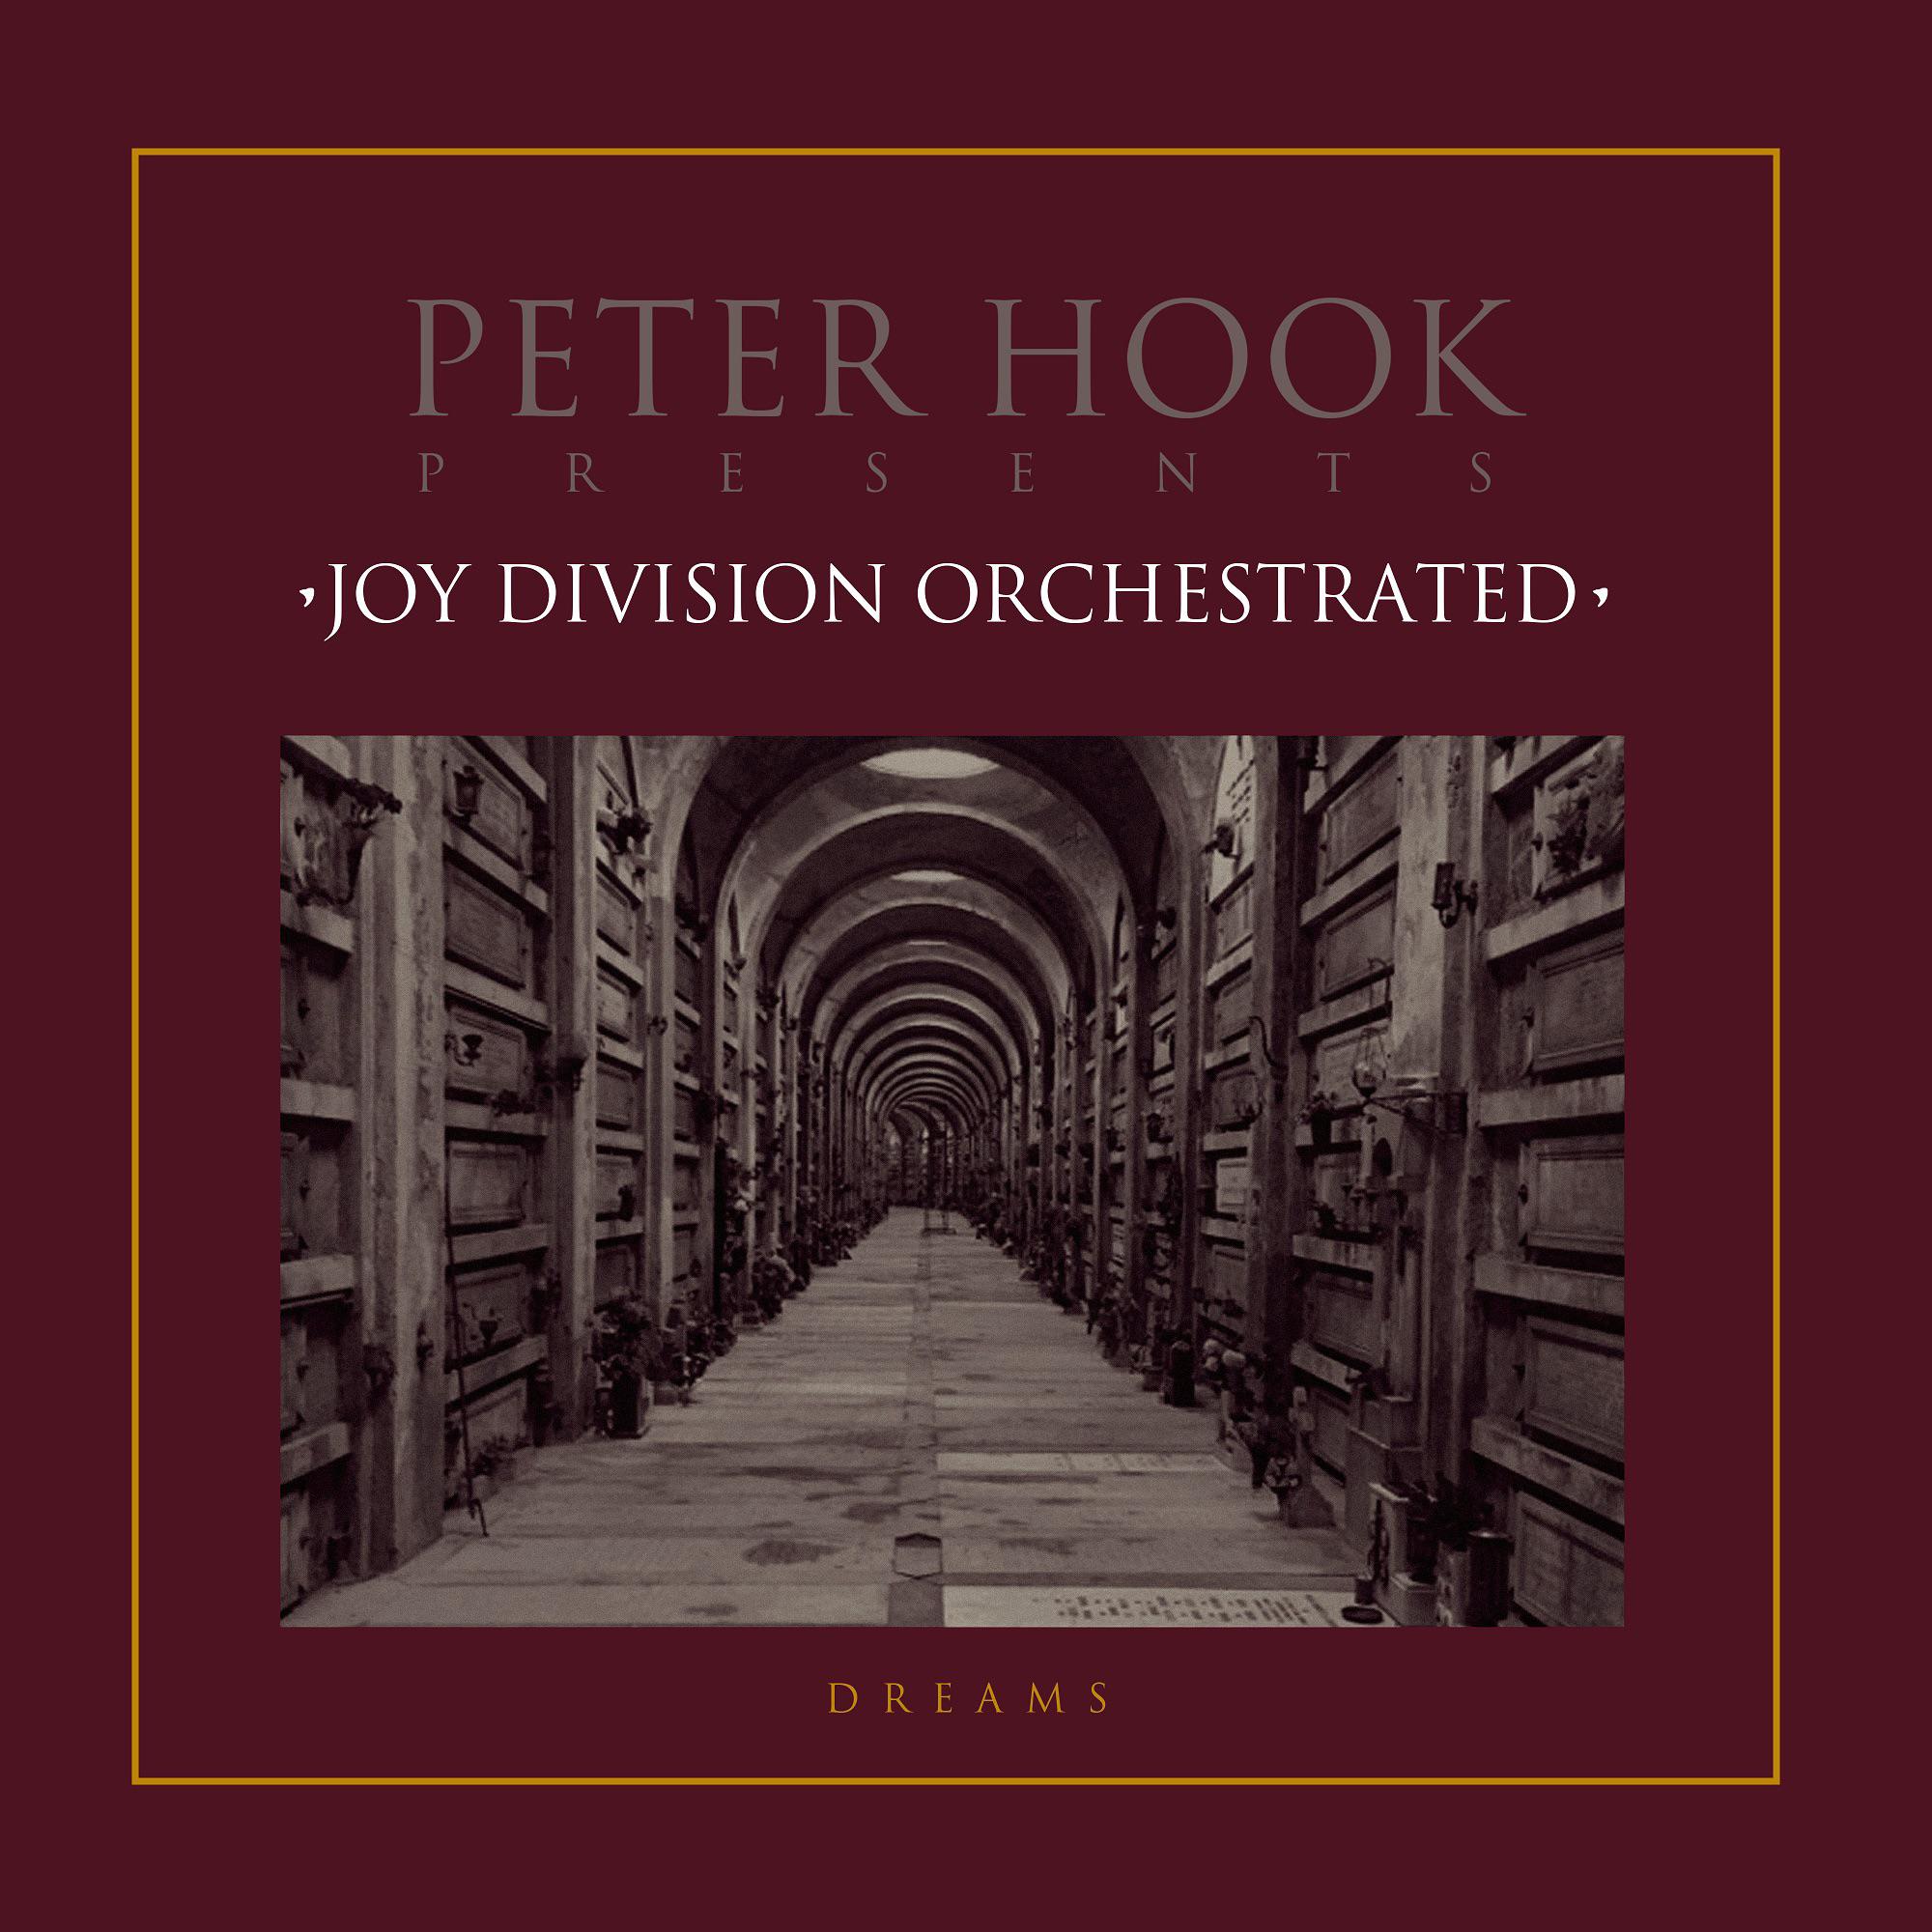 Peter Hook - Peter Hook Presents Joy Division Orchestrated (Dreams EP)